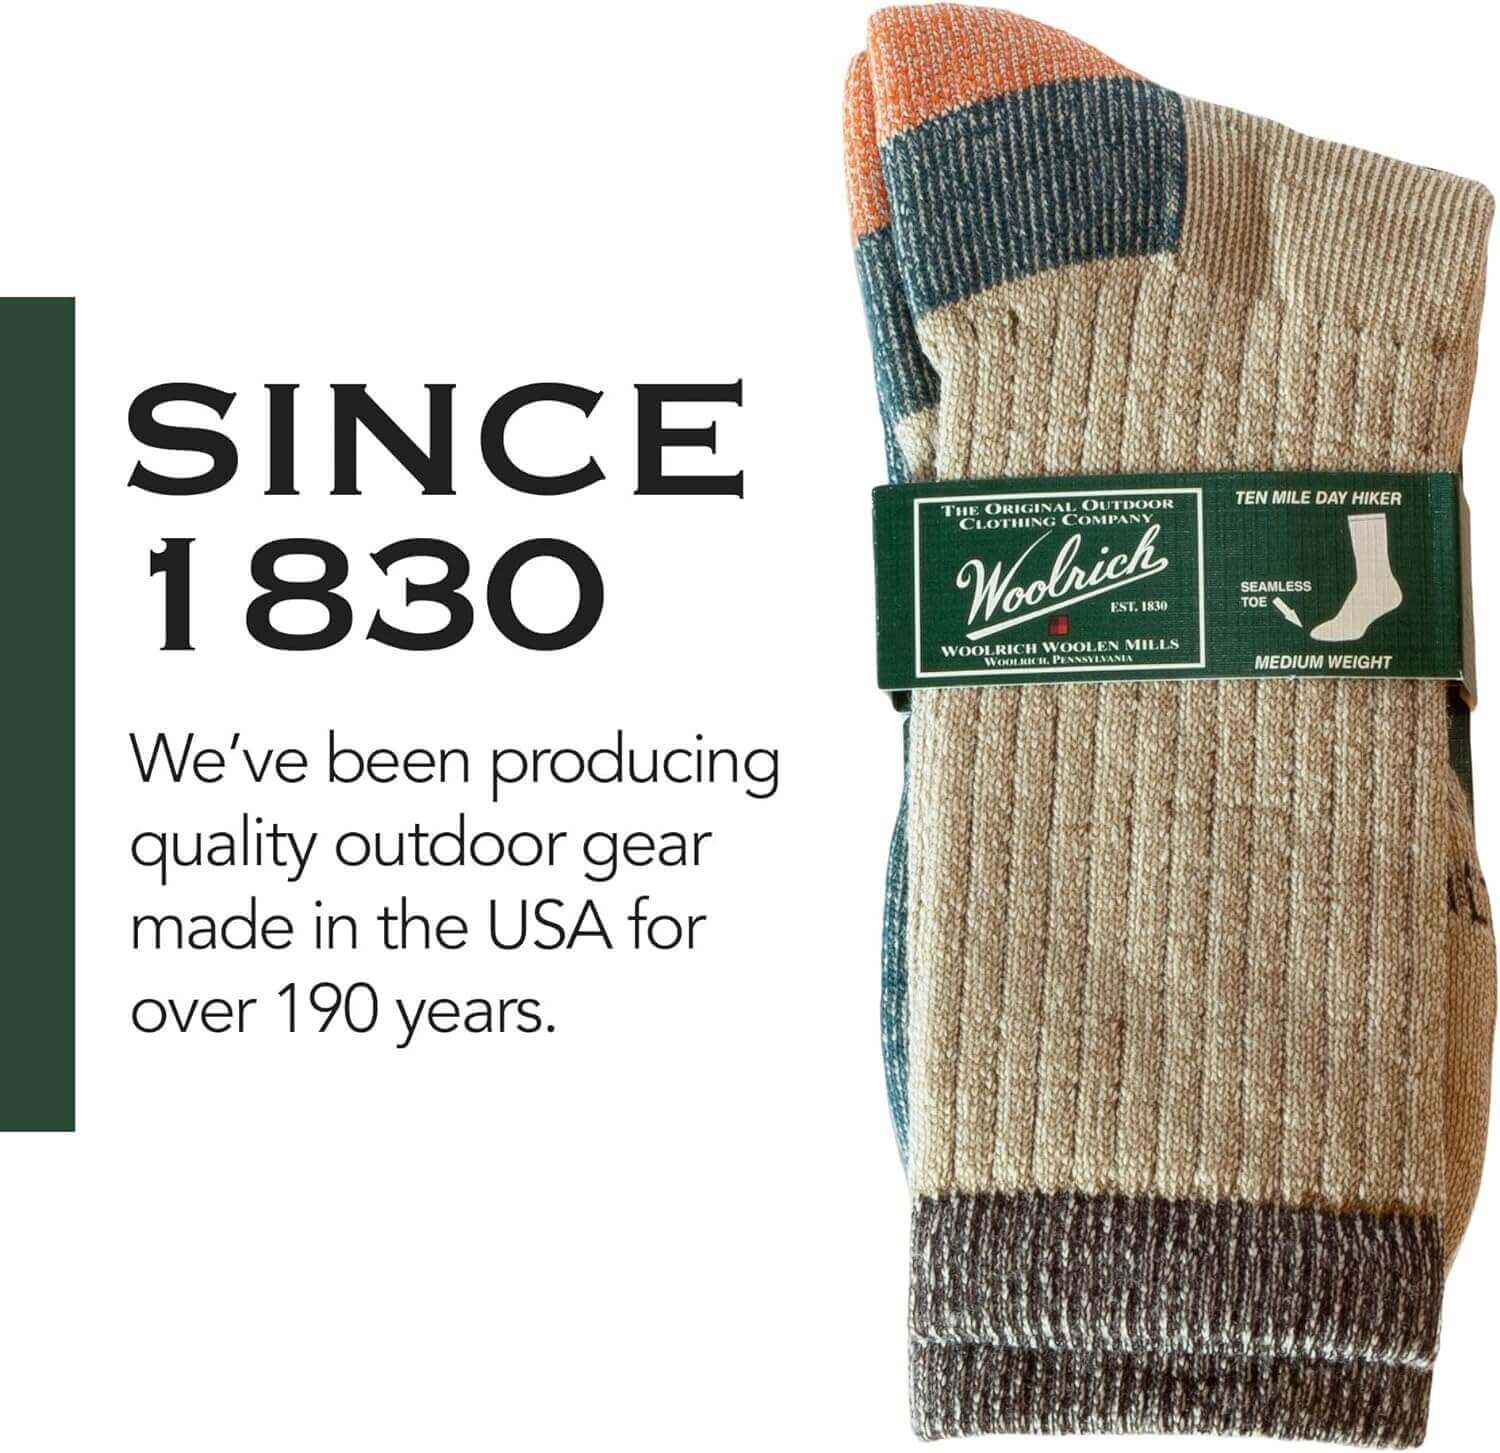 Shop The Latest >2 Pairs Woolrich Merino Wool Socks for Men - Made in USA > *Only $51.23*> From The Top Brand > *Woolrichl* > Shop Now and Get Free Shipping On Orders Over $45.00 >*Shop Earth Foot*